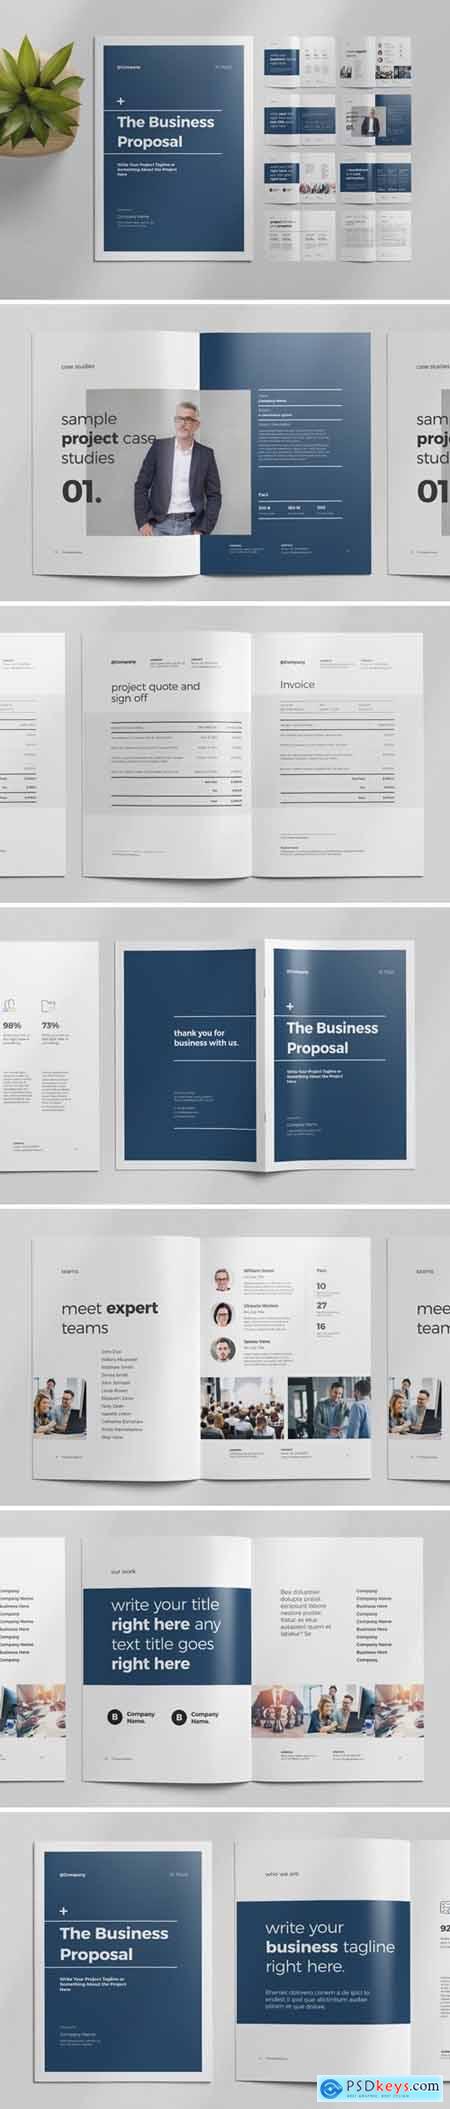 Website Proposal Layout with Blue Accents